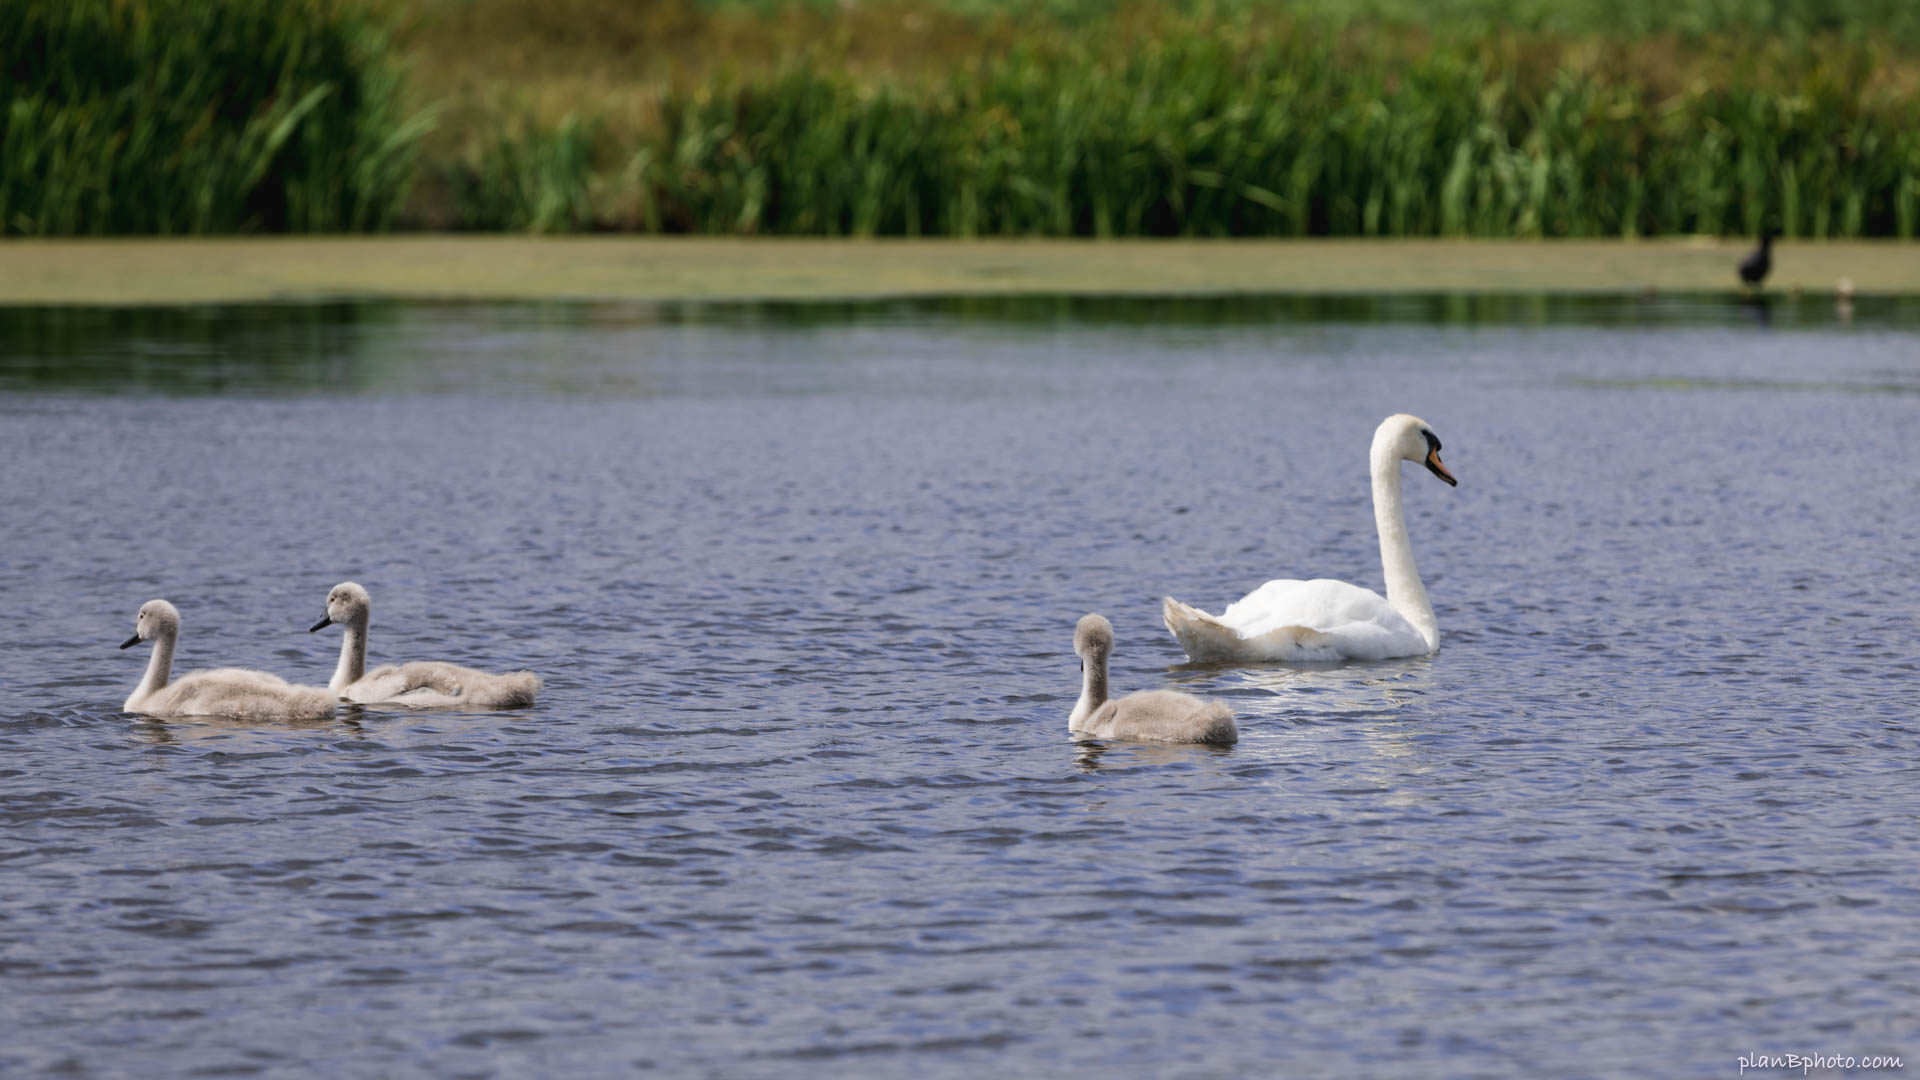 Mother swan with small swan babies (cygnets)